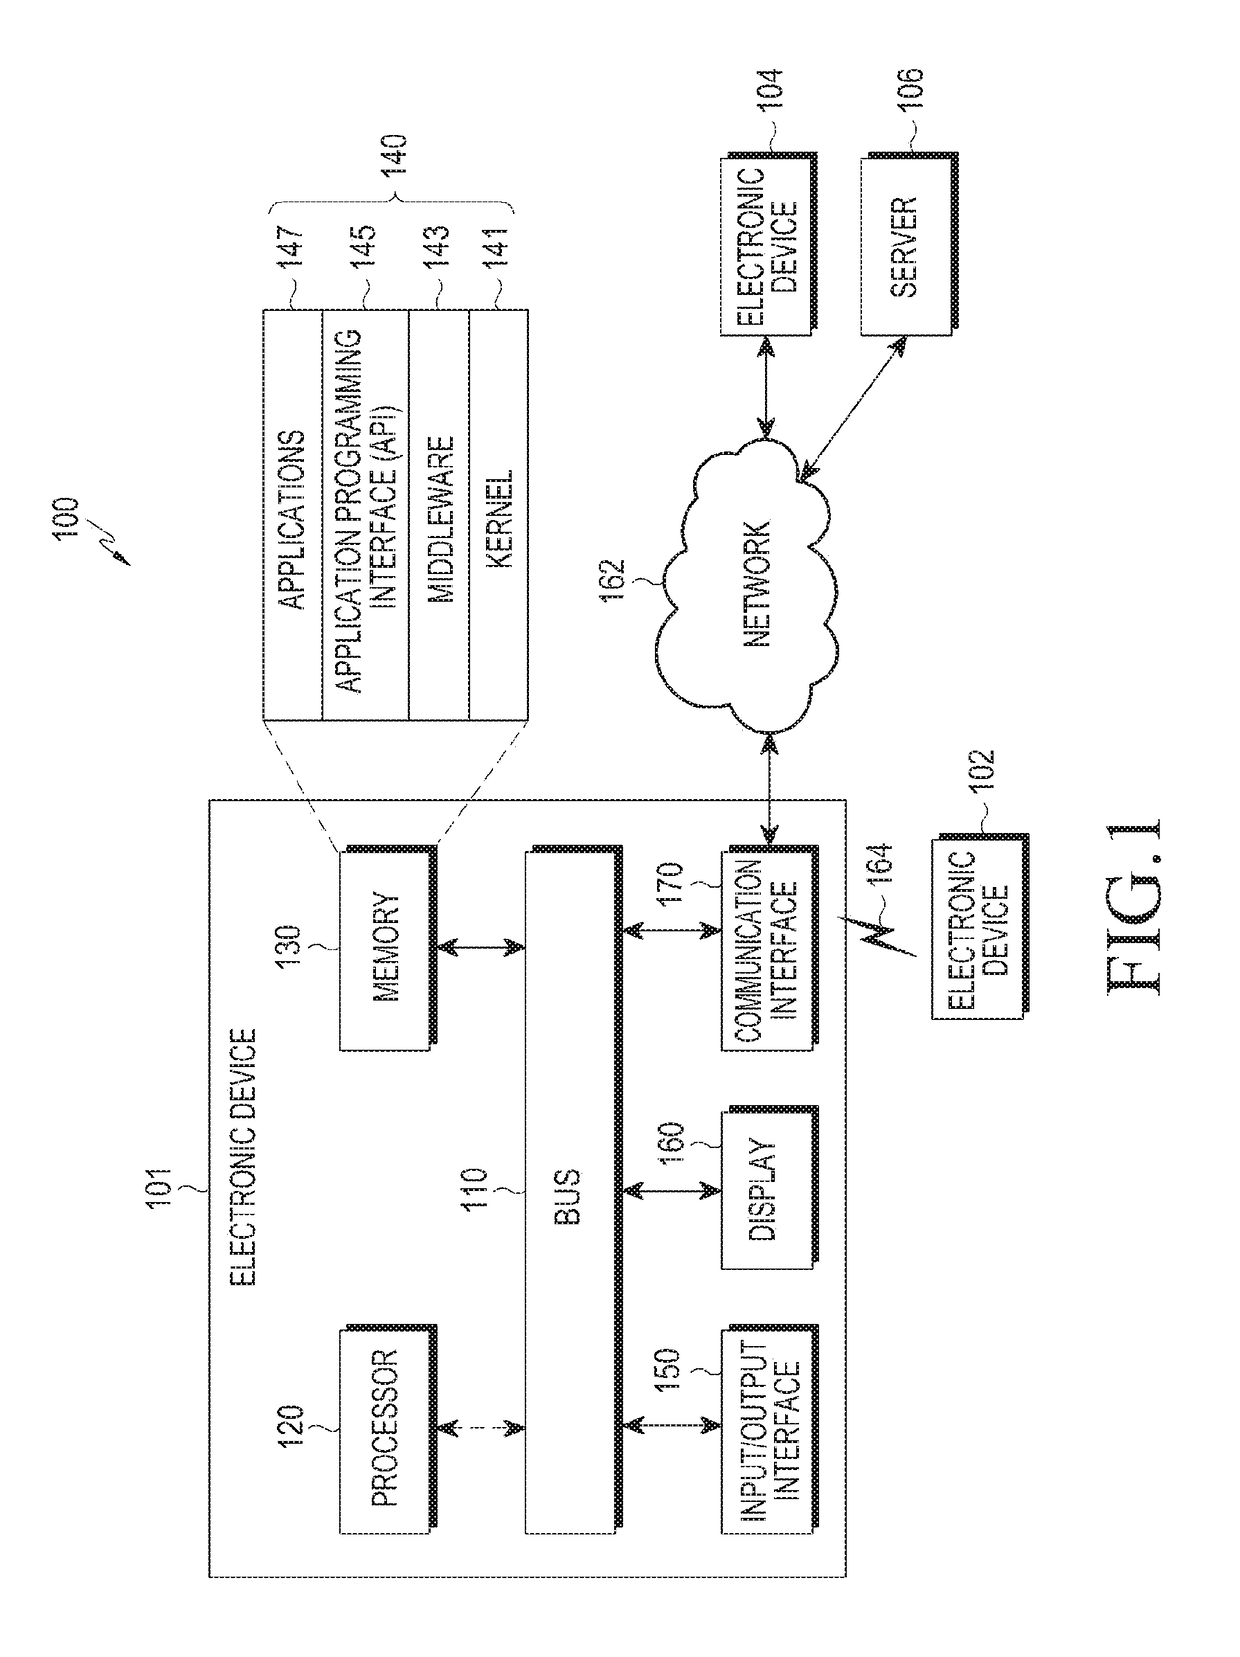 Electronic device and method for executing application or service